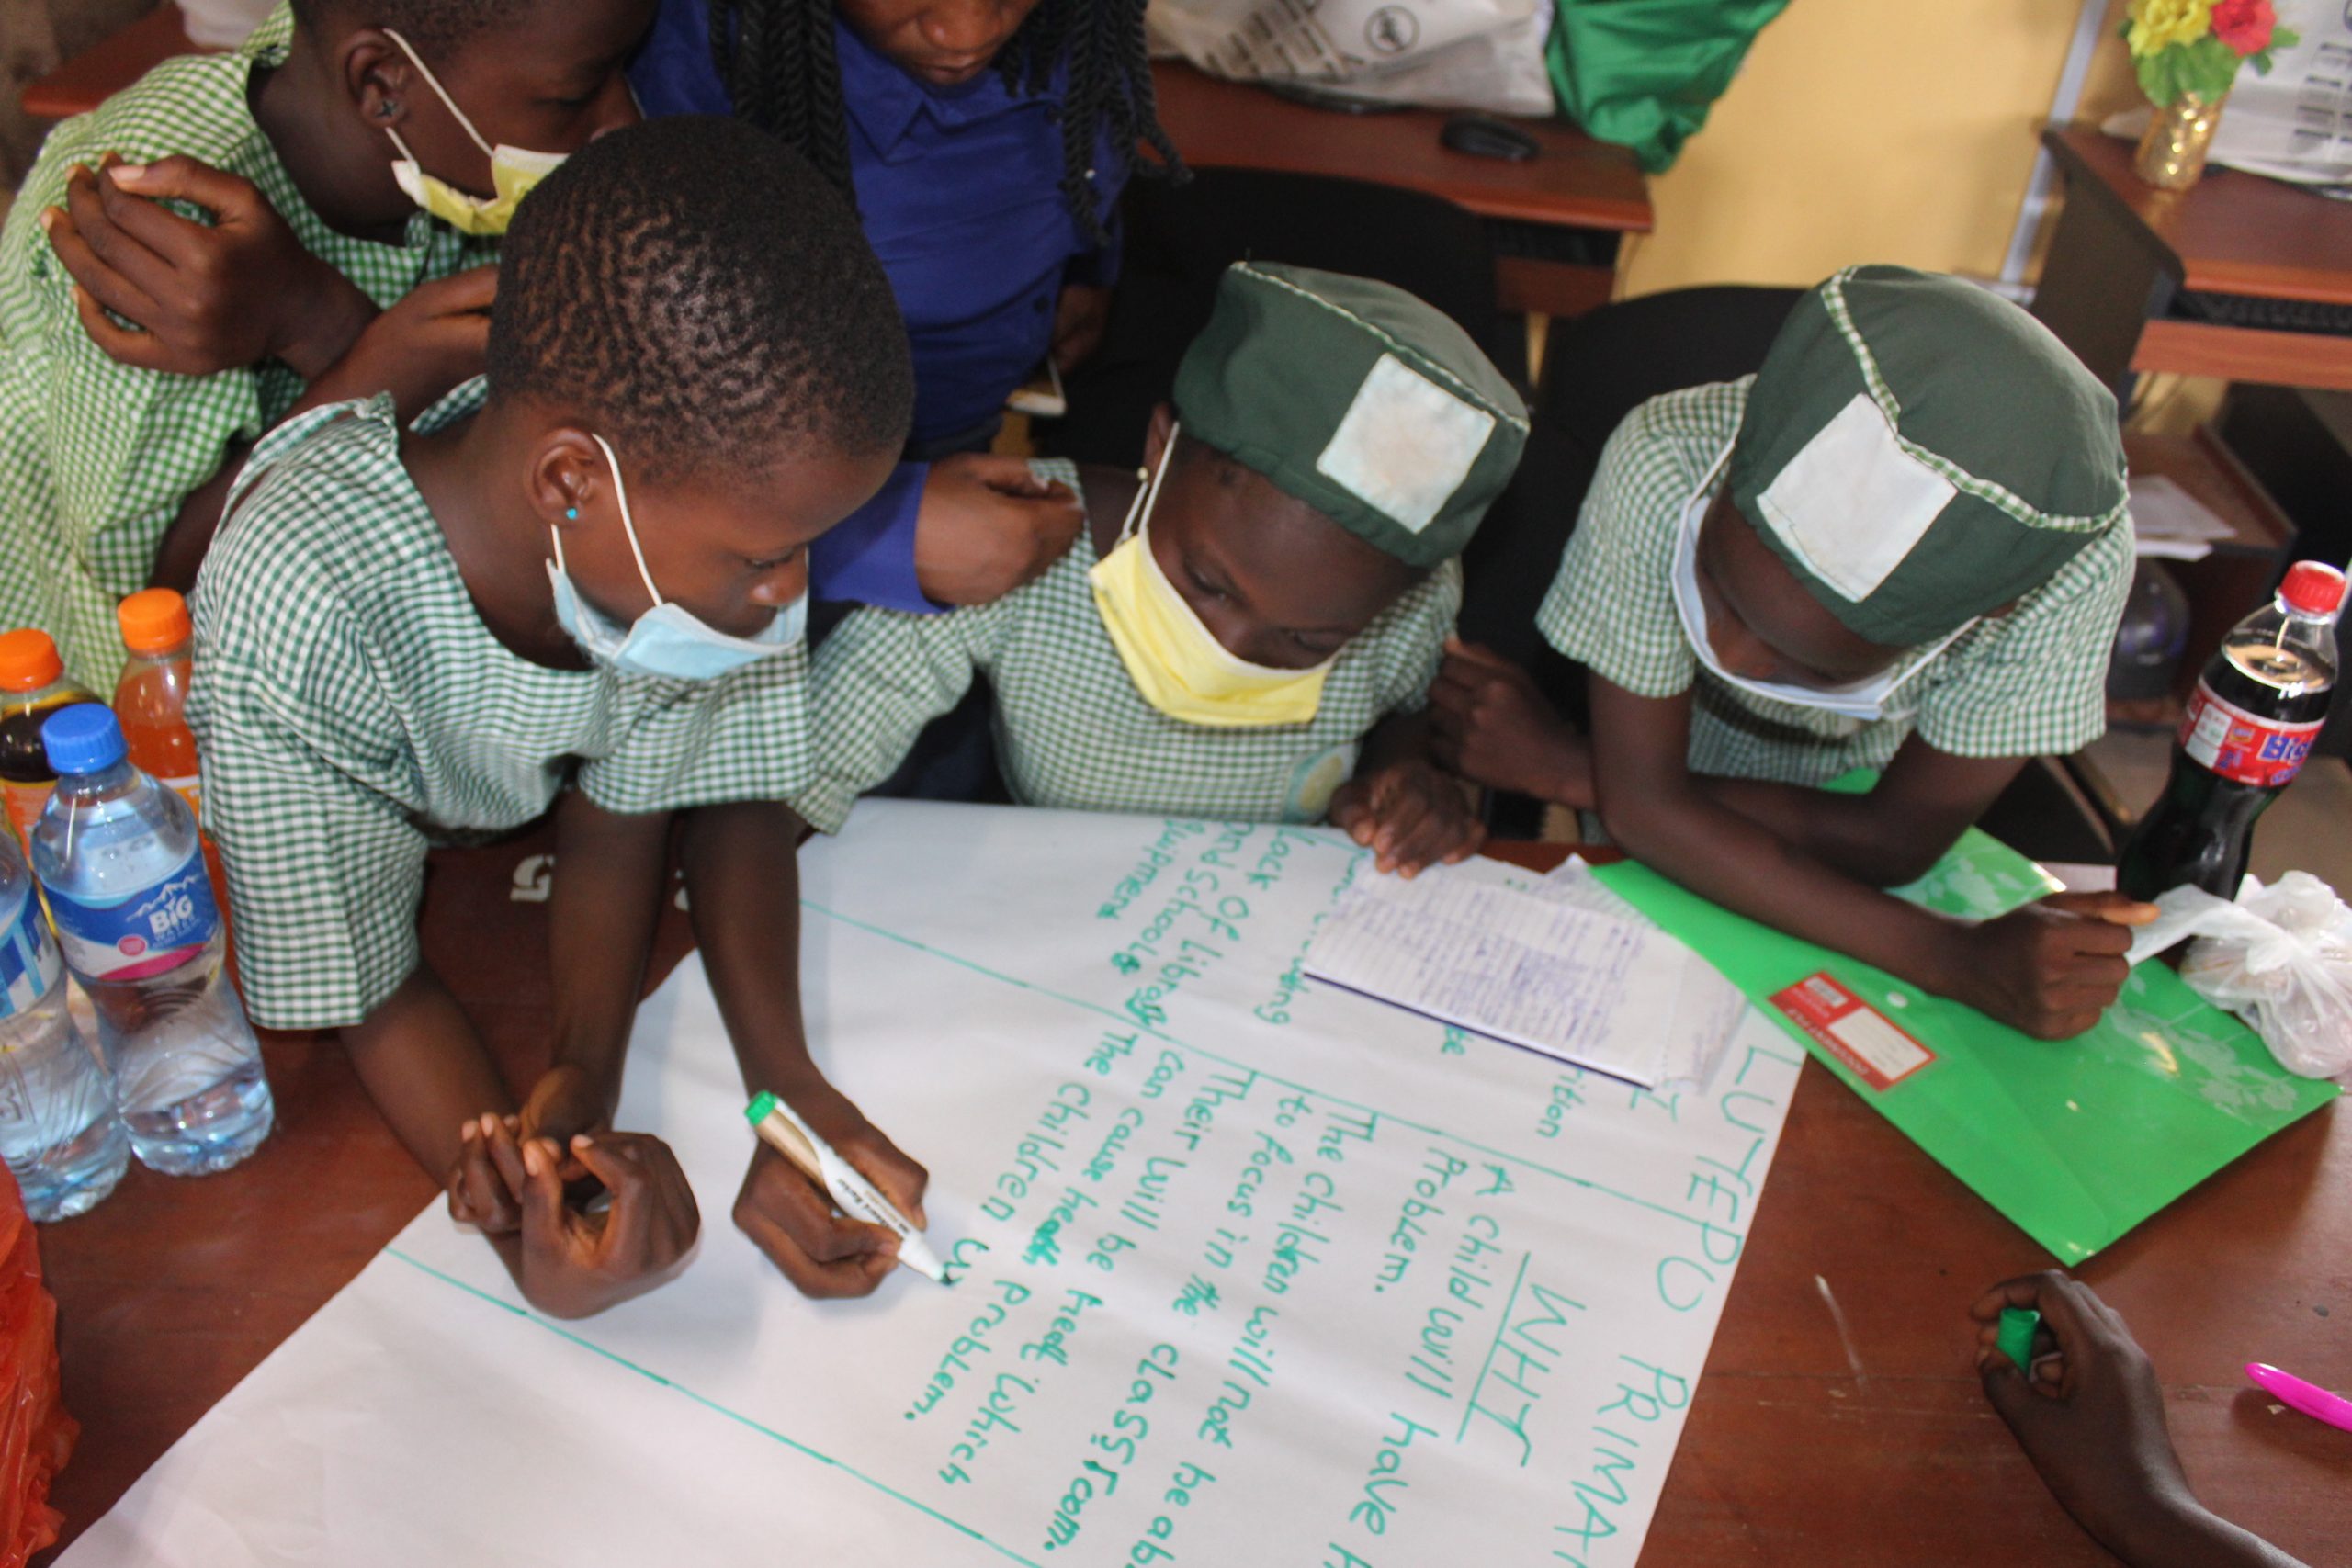 CAPACITY BUILDING FOR SAFE SPACE FOR GIRLS